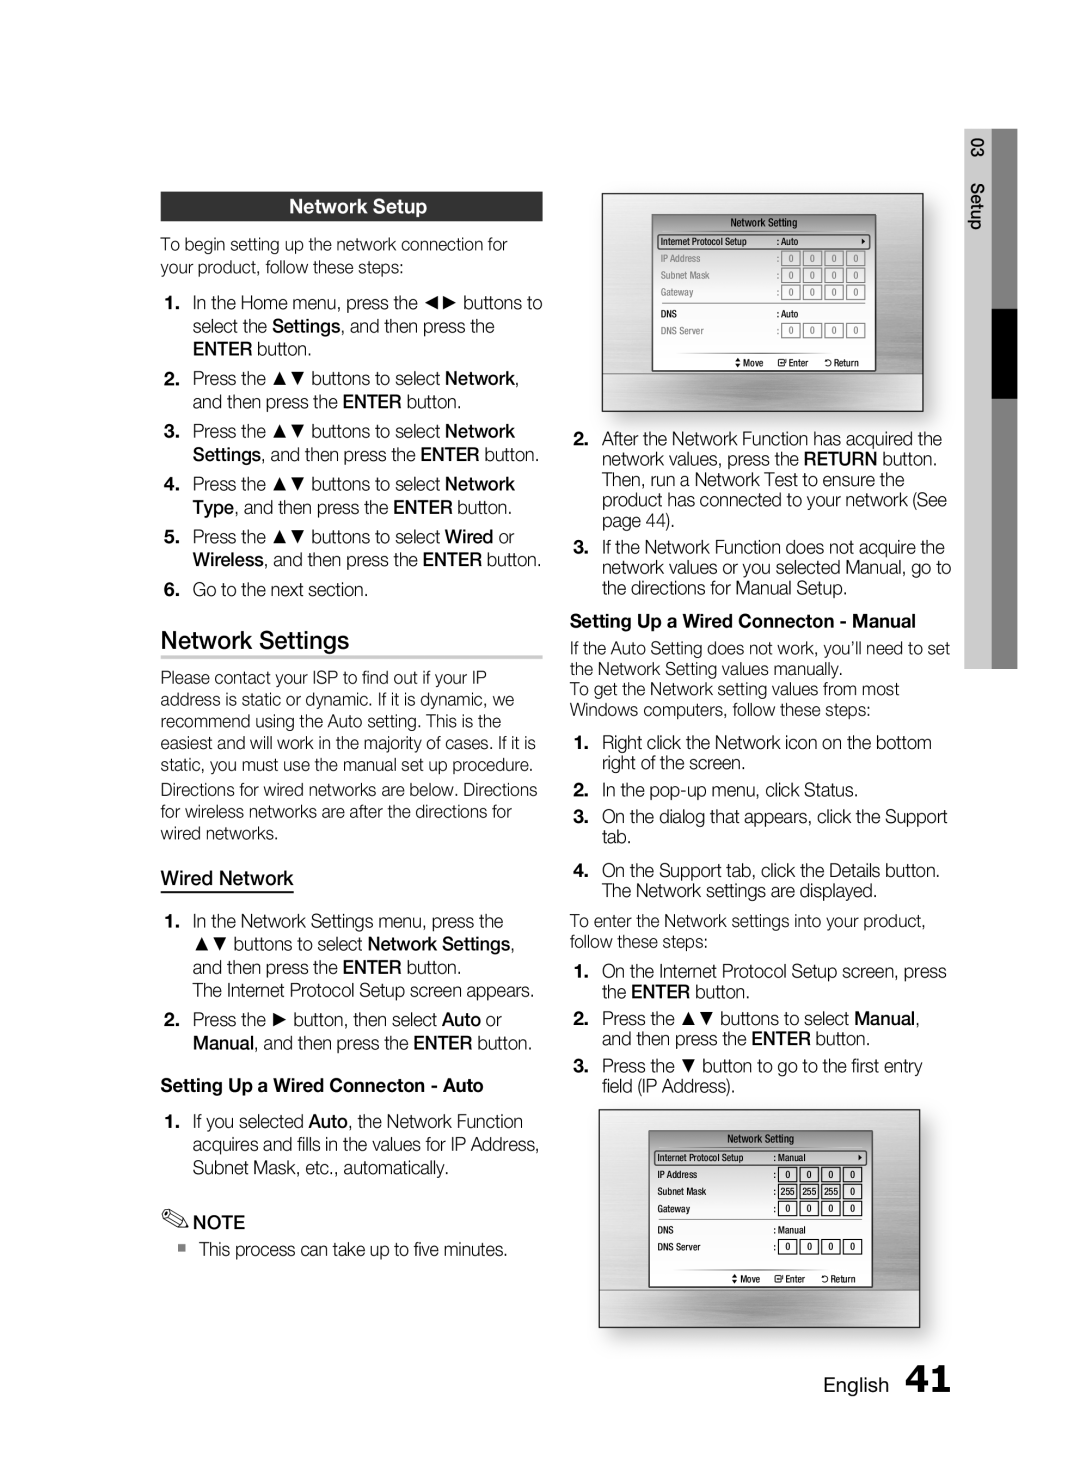 Samsung C6600 user manual Network Settings, Network Setup, Wired Network, English 